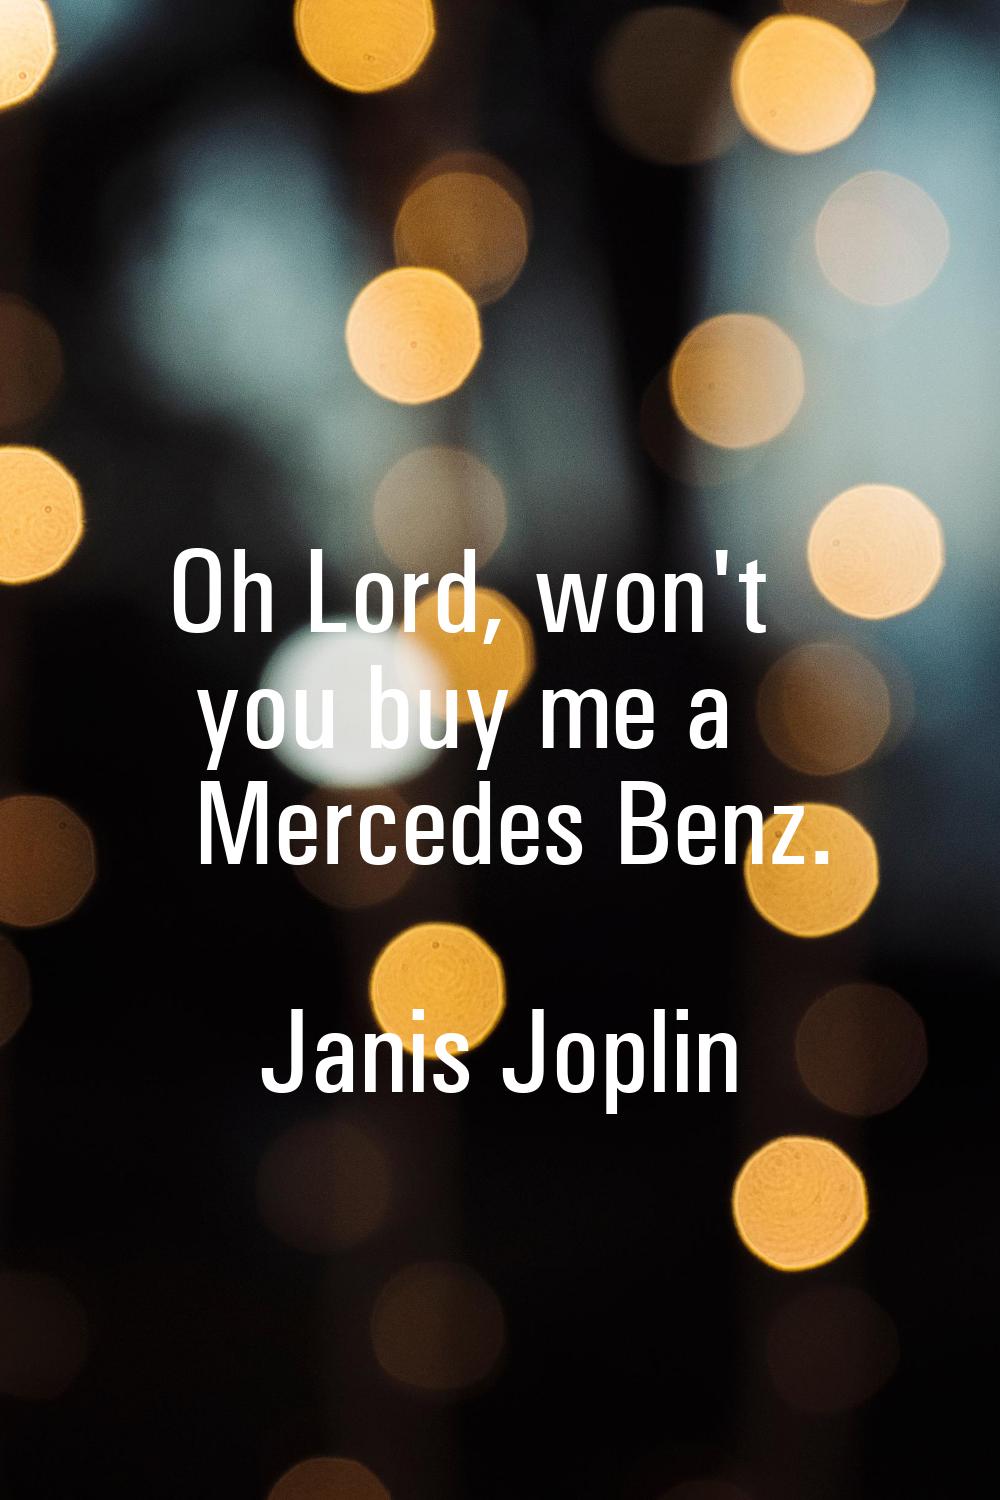 Oh Lord, won't you buy me a Mercedes Benz.